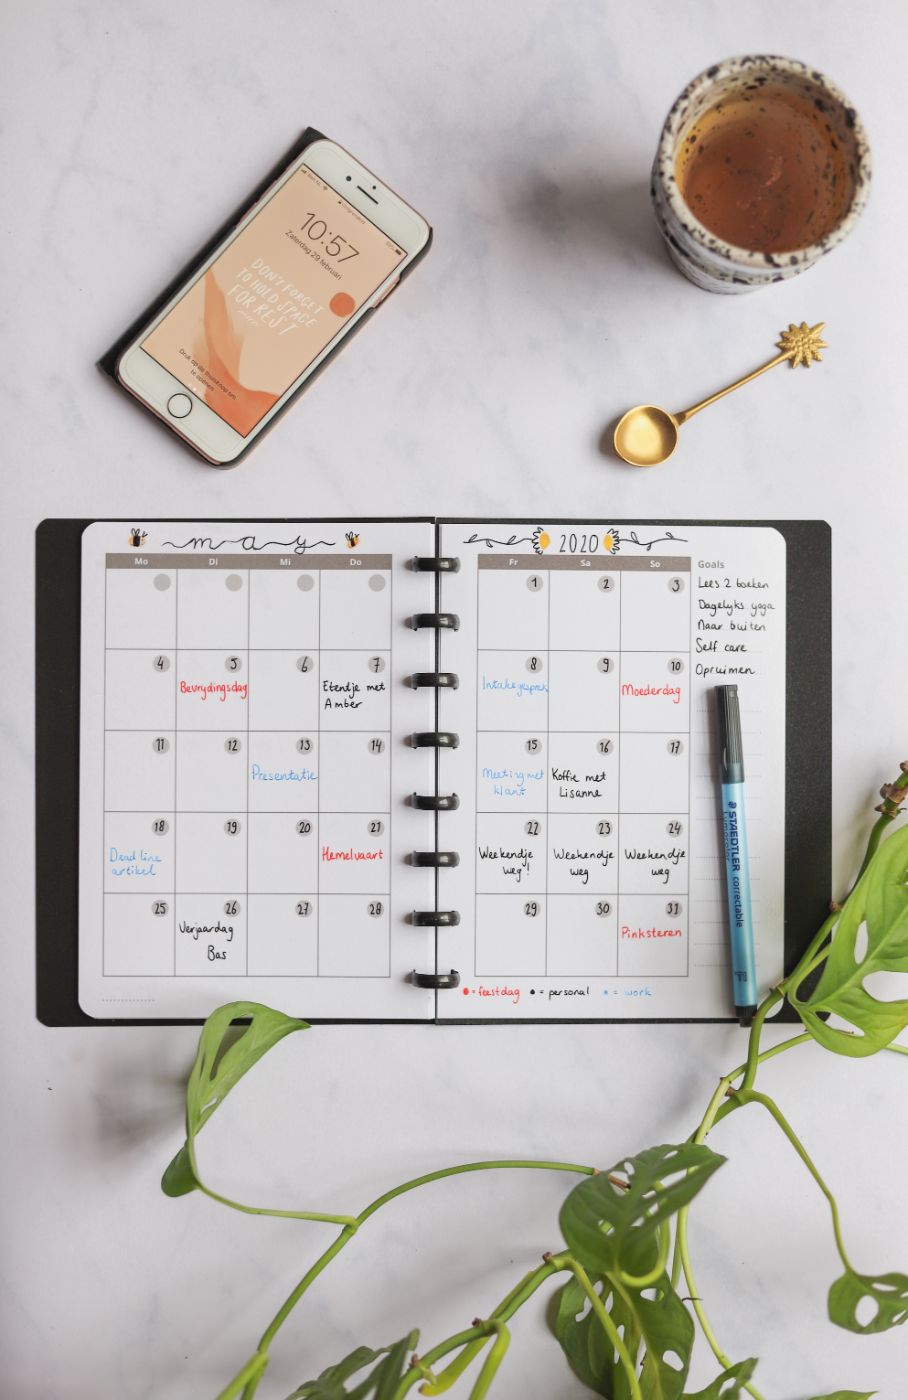 Vertical erasable weekly calendar next to assorted items on marble background